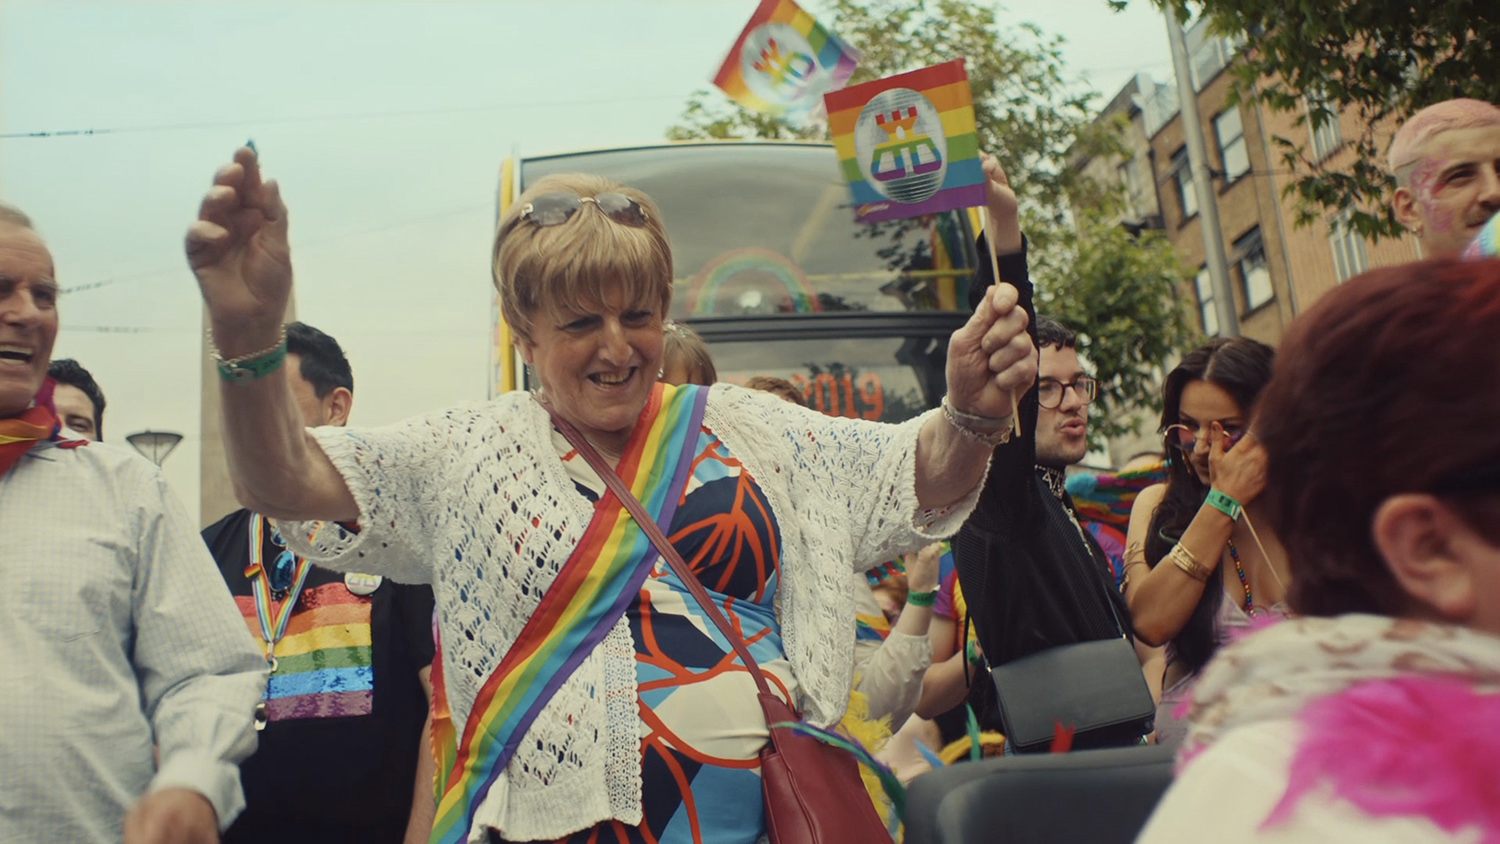 Dublin Bus - The Long Road To Pride